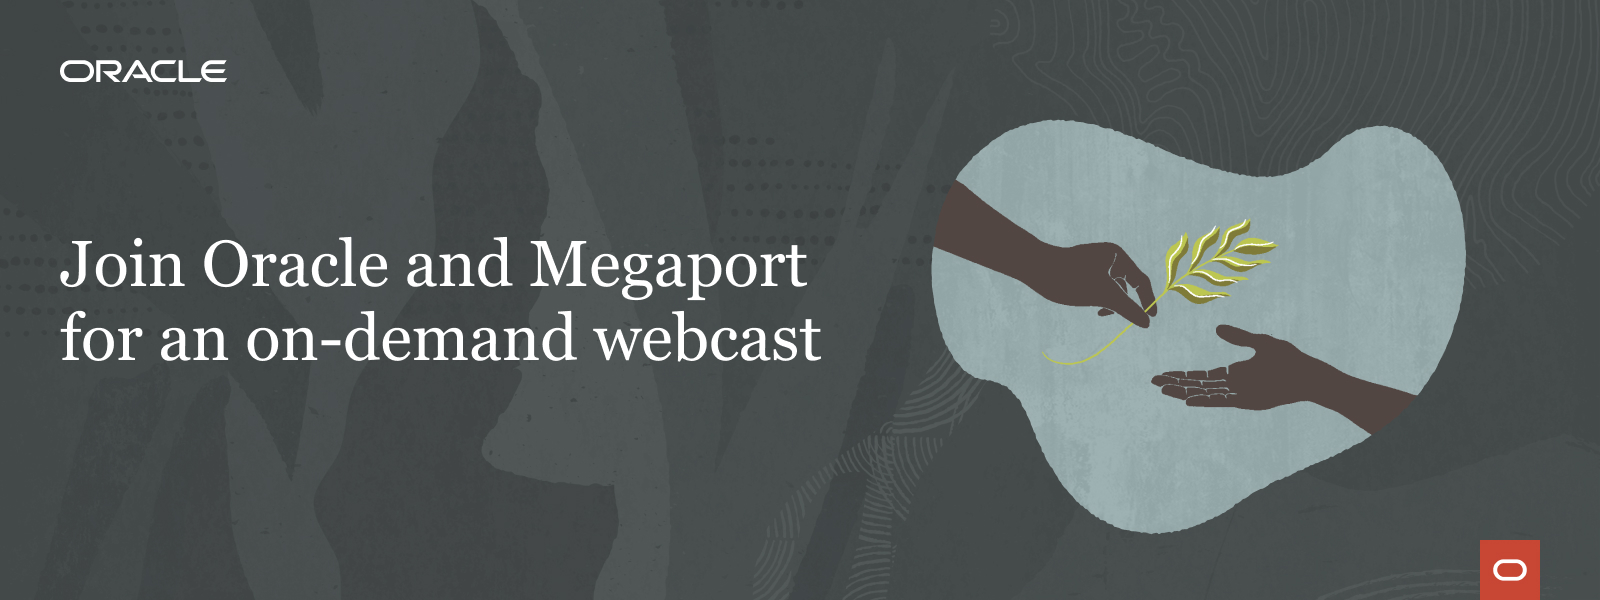 Join us for an on demand webcast